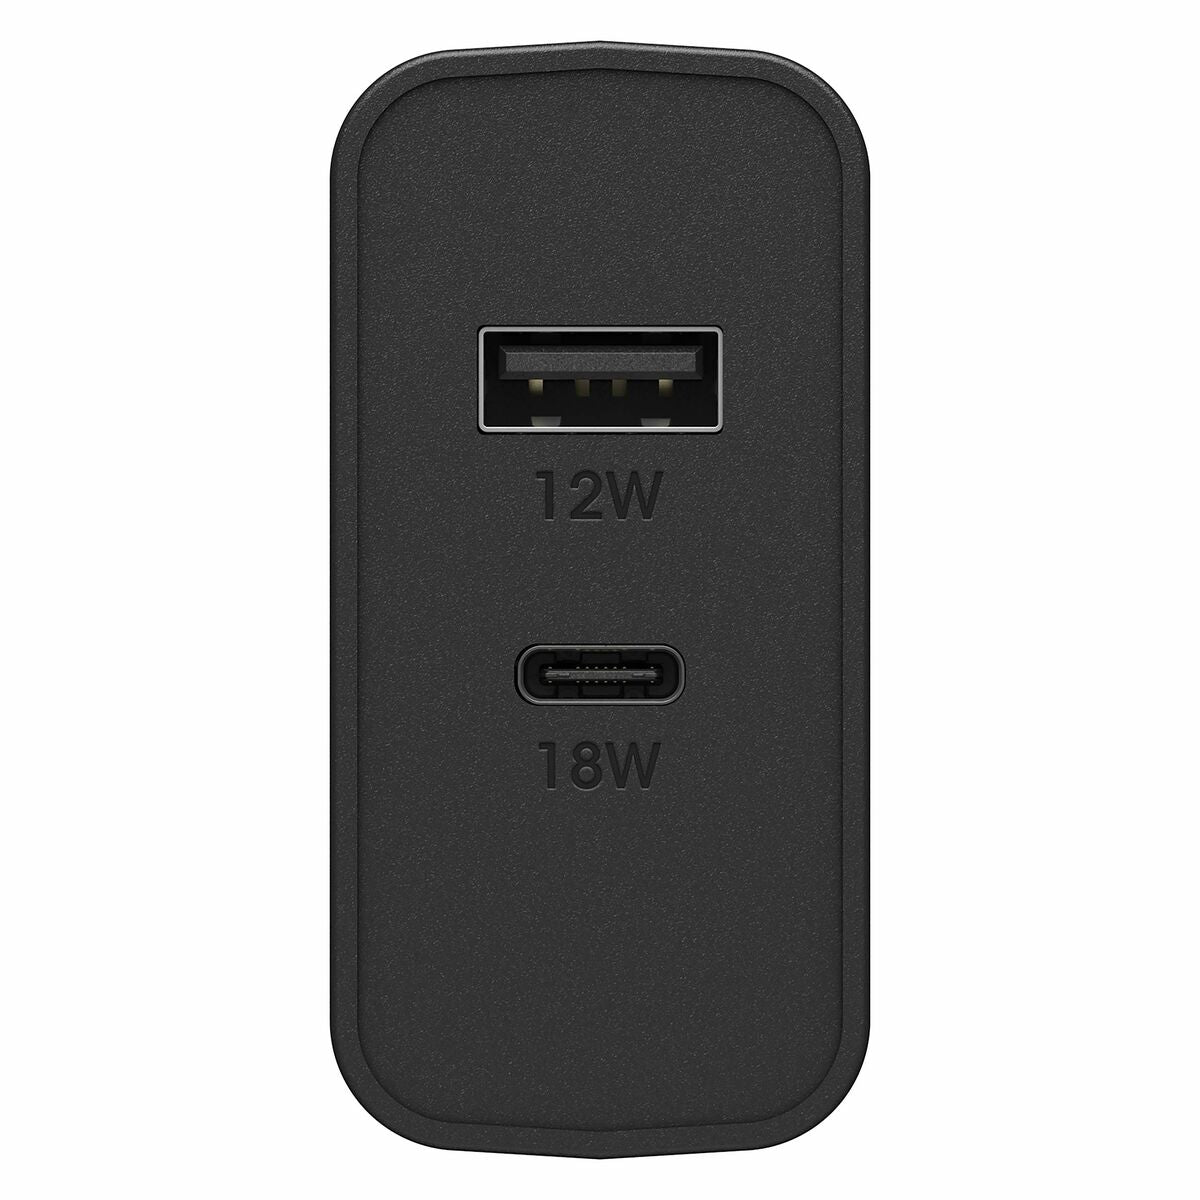 Wall Charger Otterbox 78-52723 Black 30 W